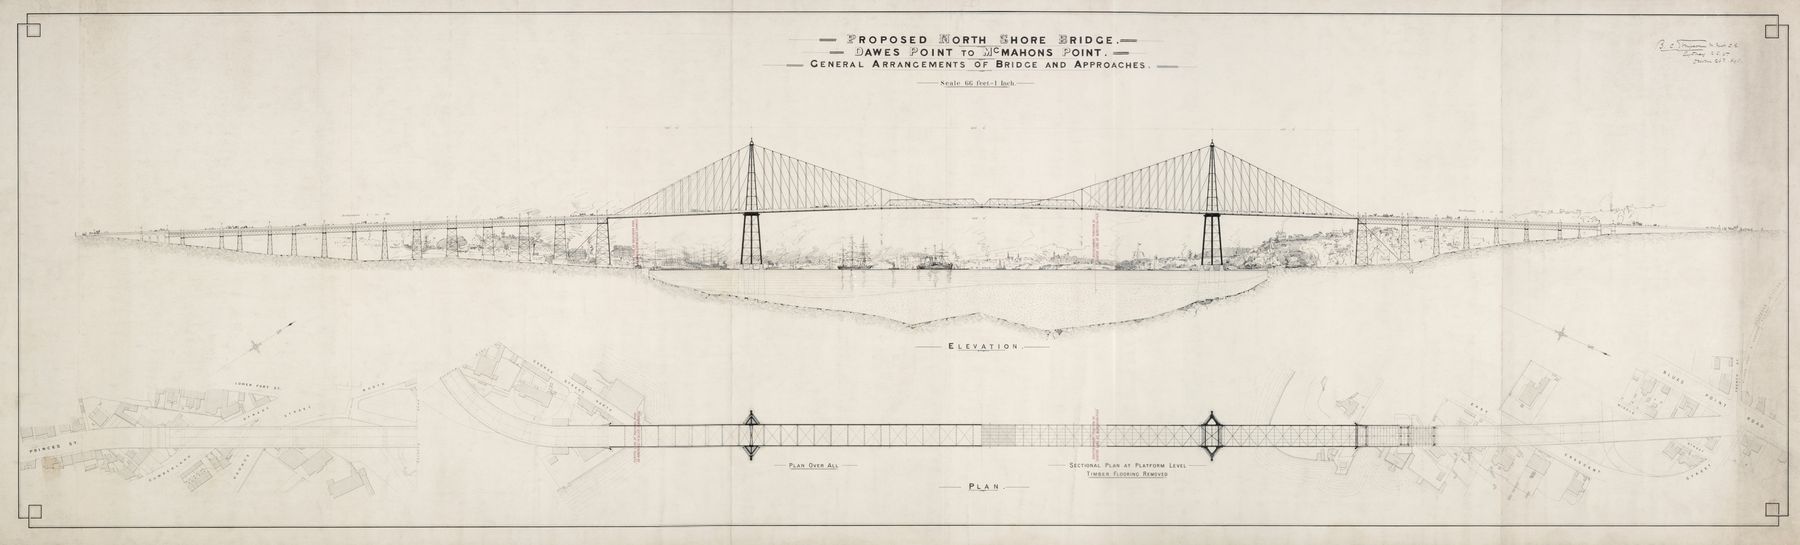 Proposed North Shore bridge & other plans, 1894-1899 / drawing by Benjamin Crispin Simpson, PXD 318
